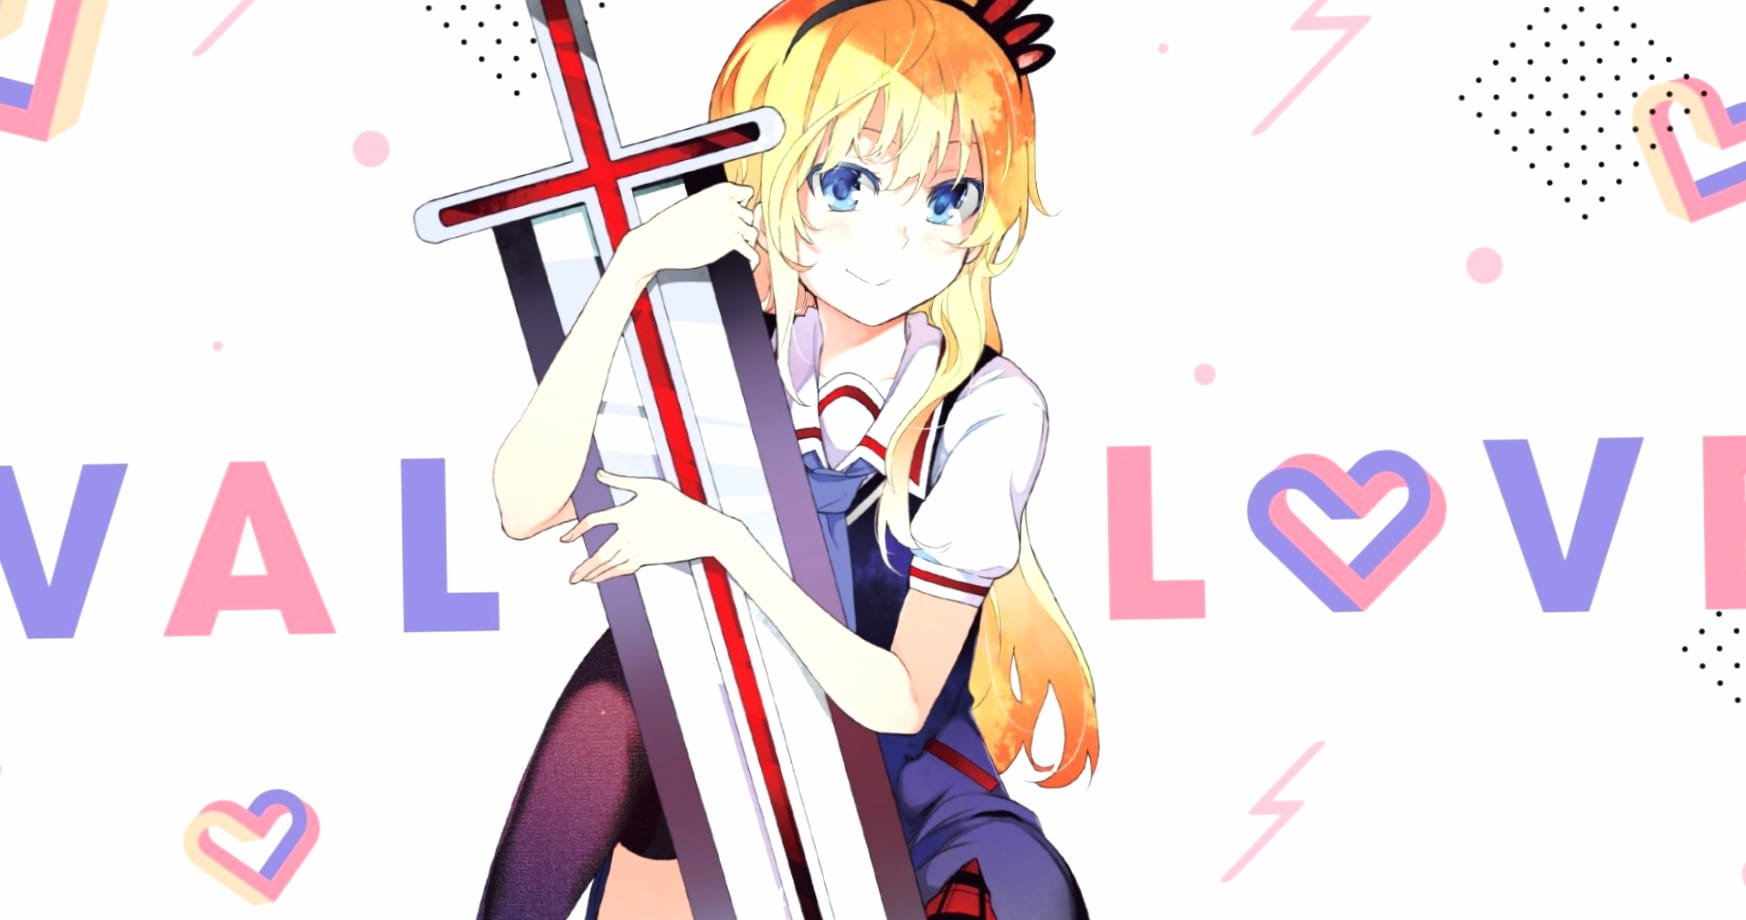 Val x Love wallpapers HD quality